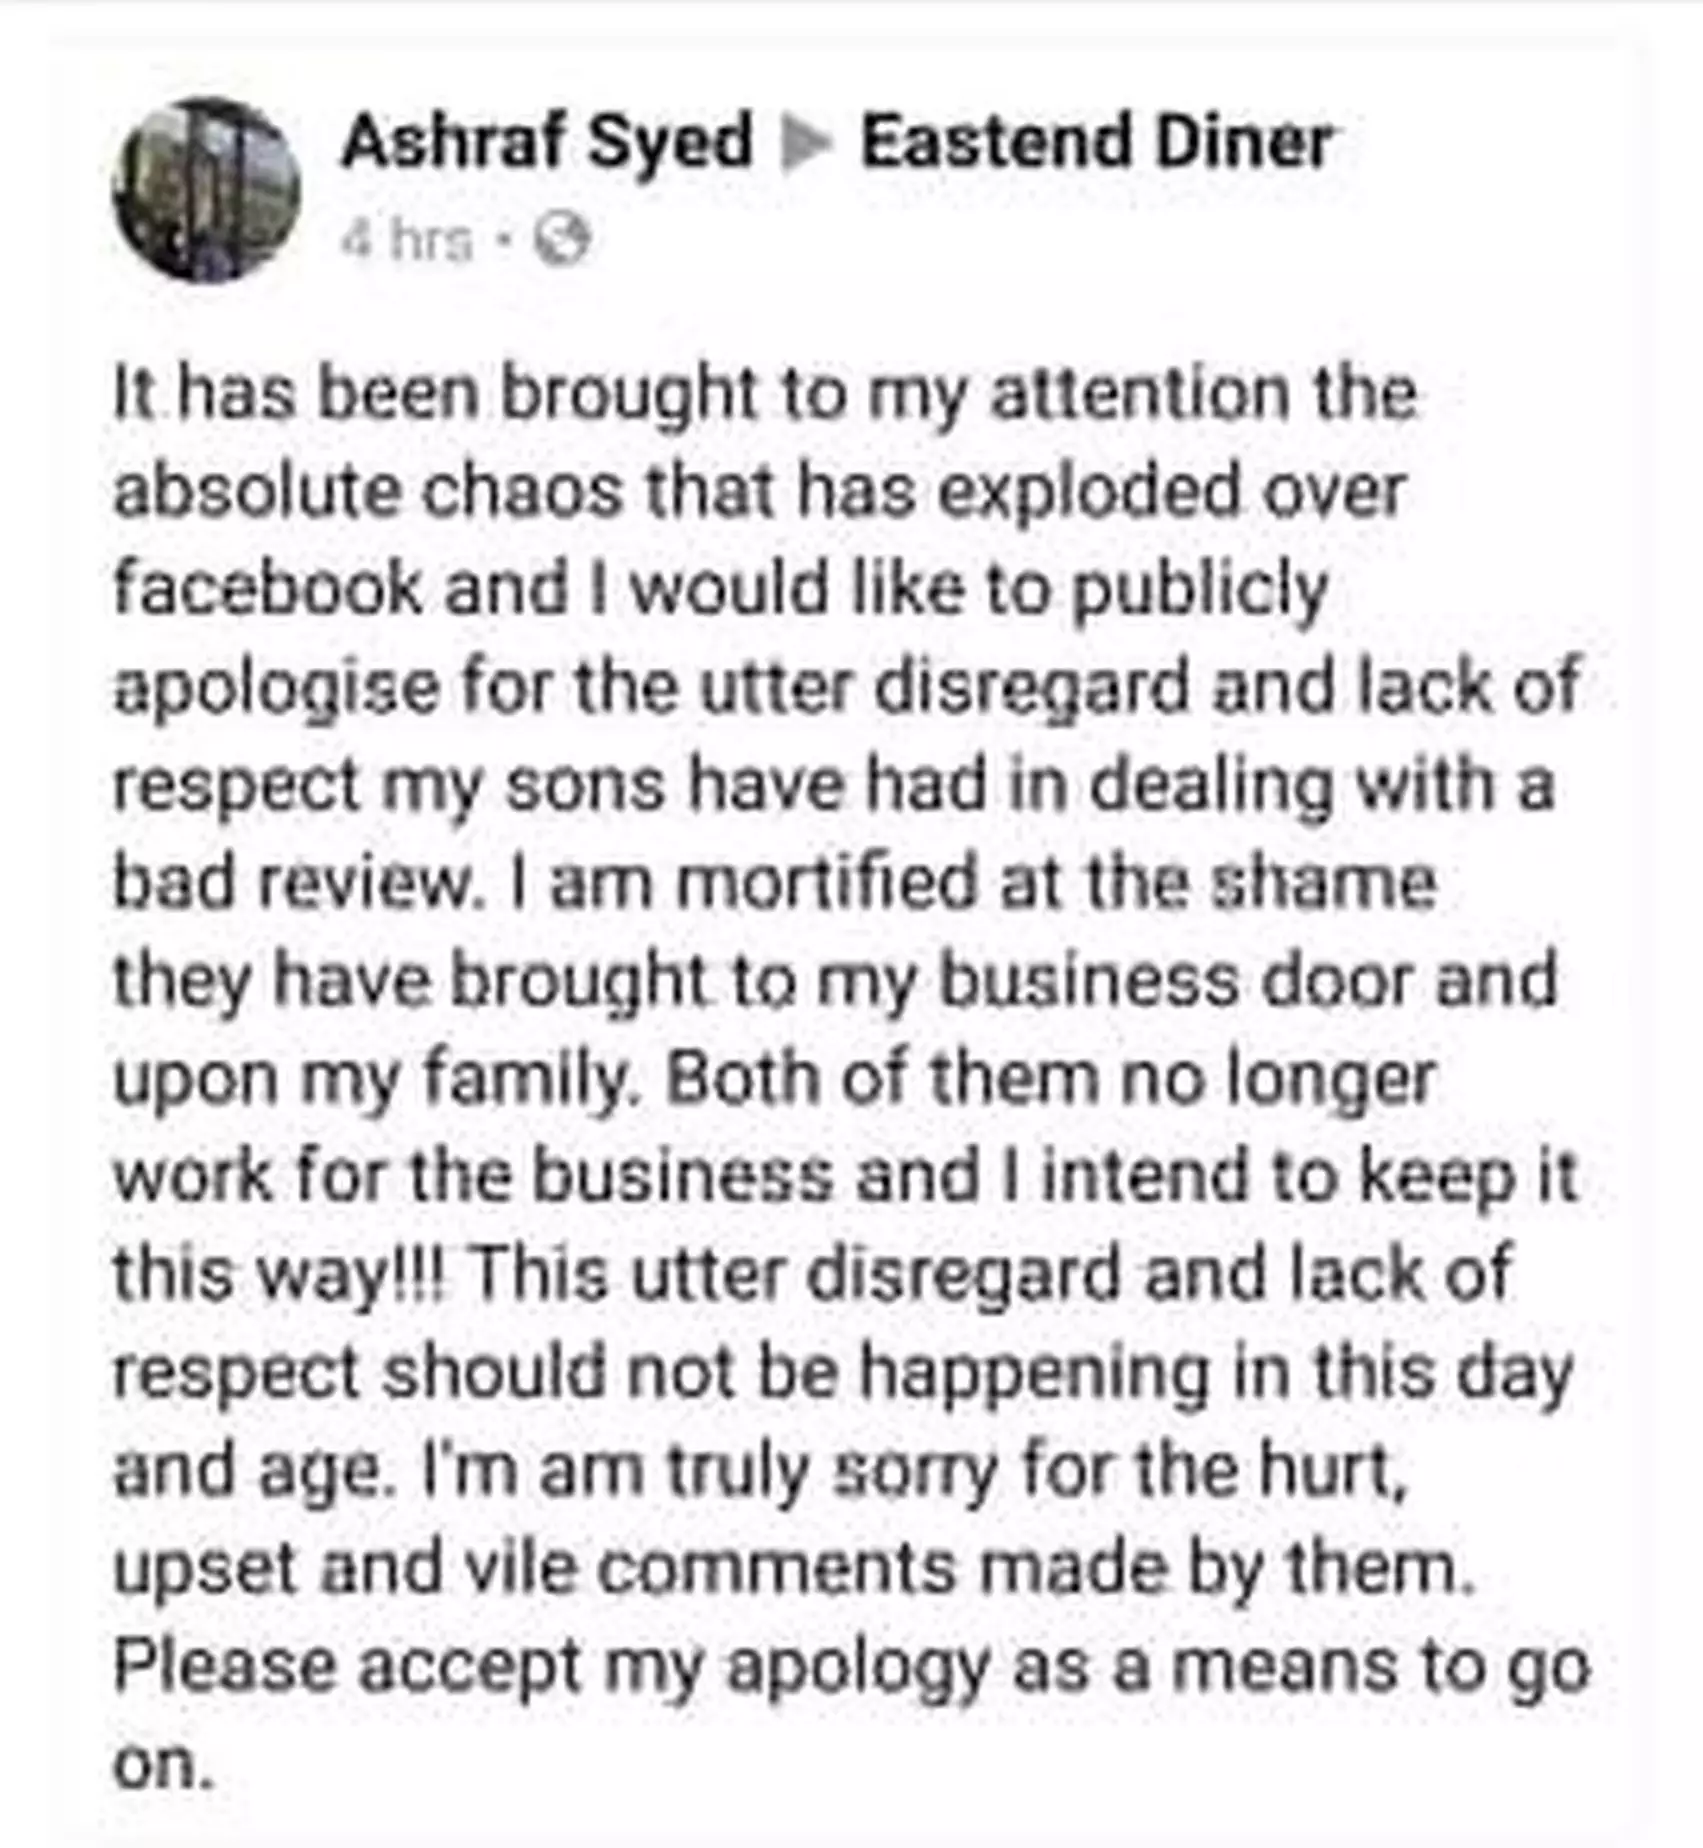 The now-deleted apology from Ashraf.